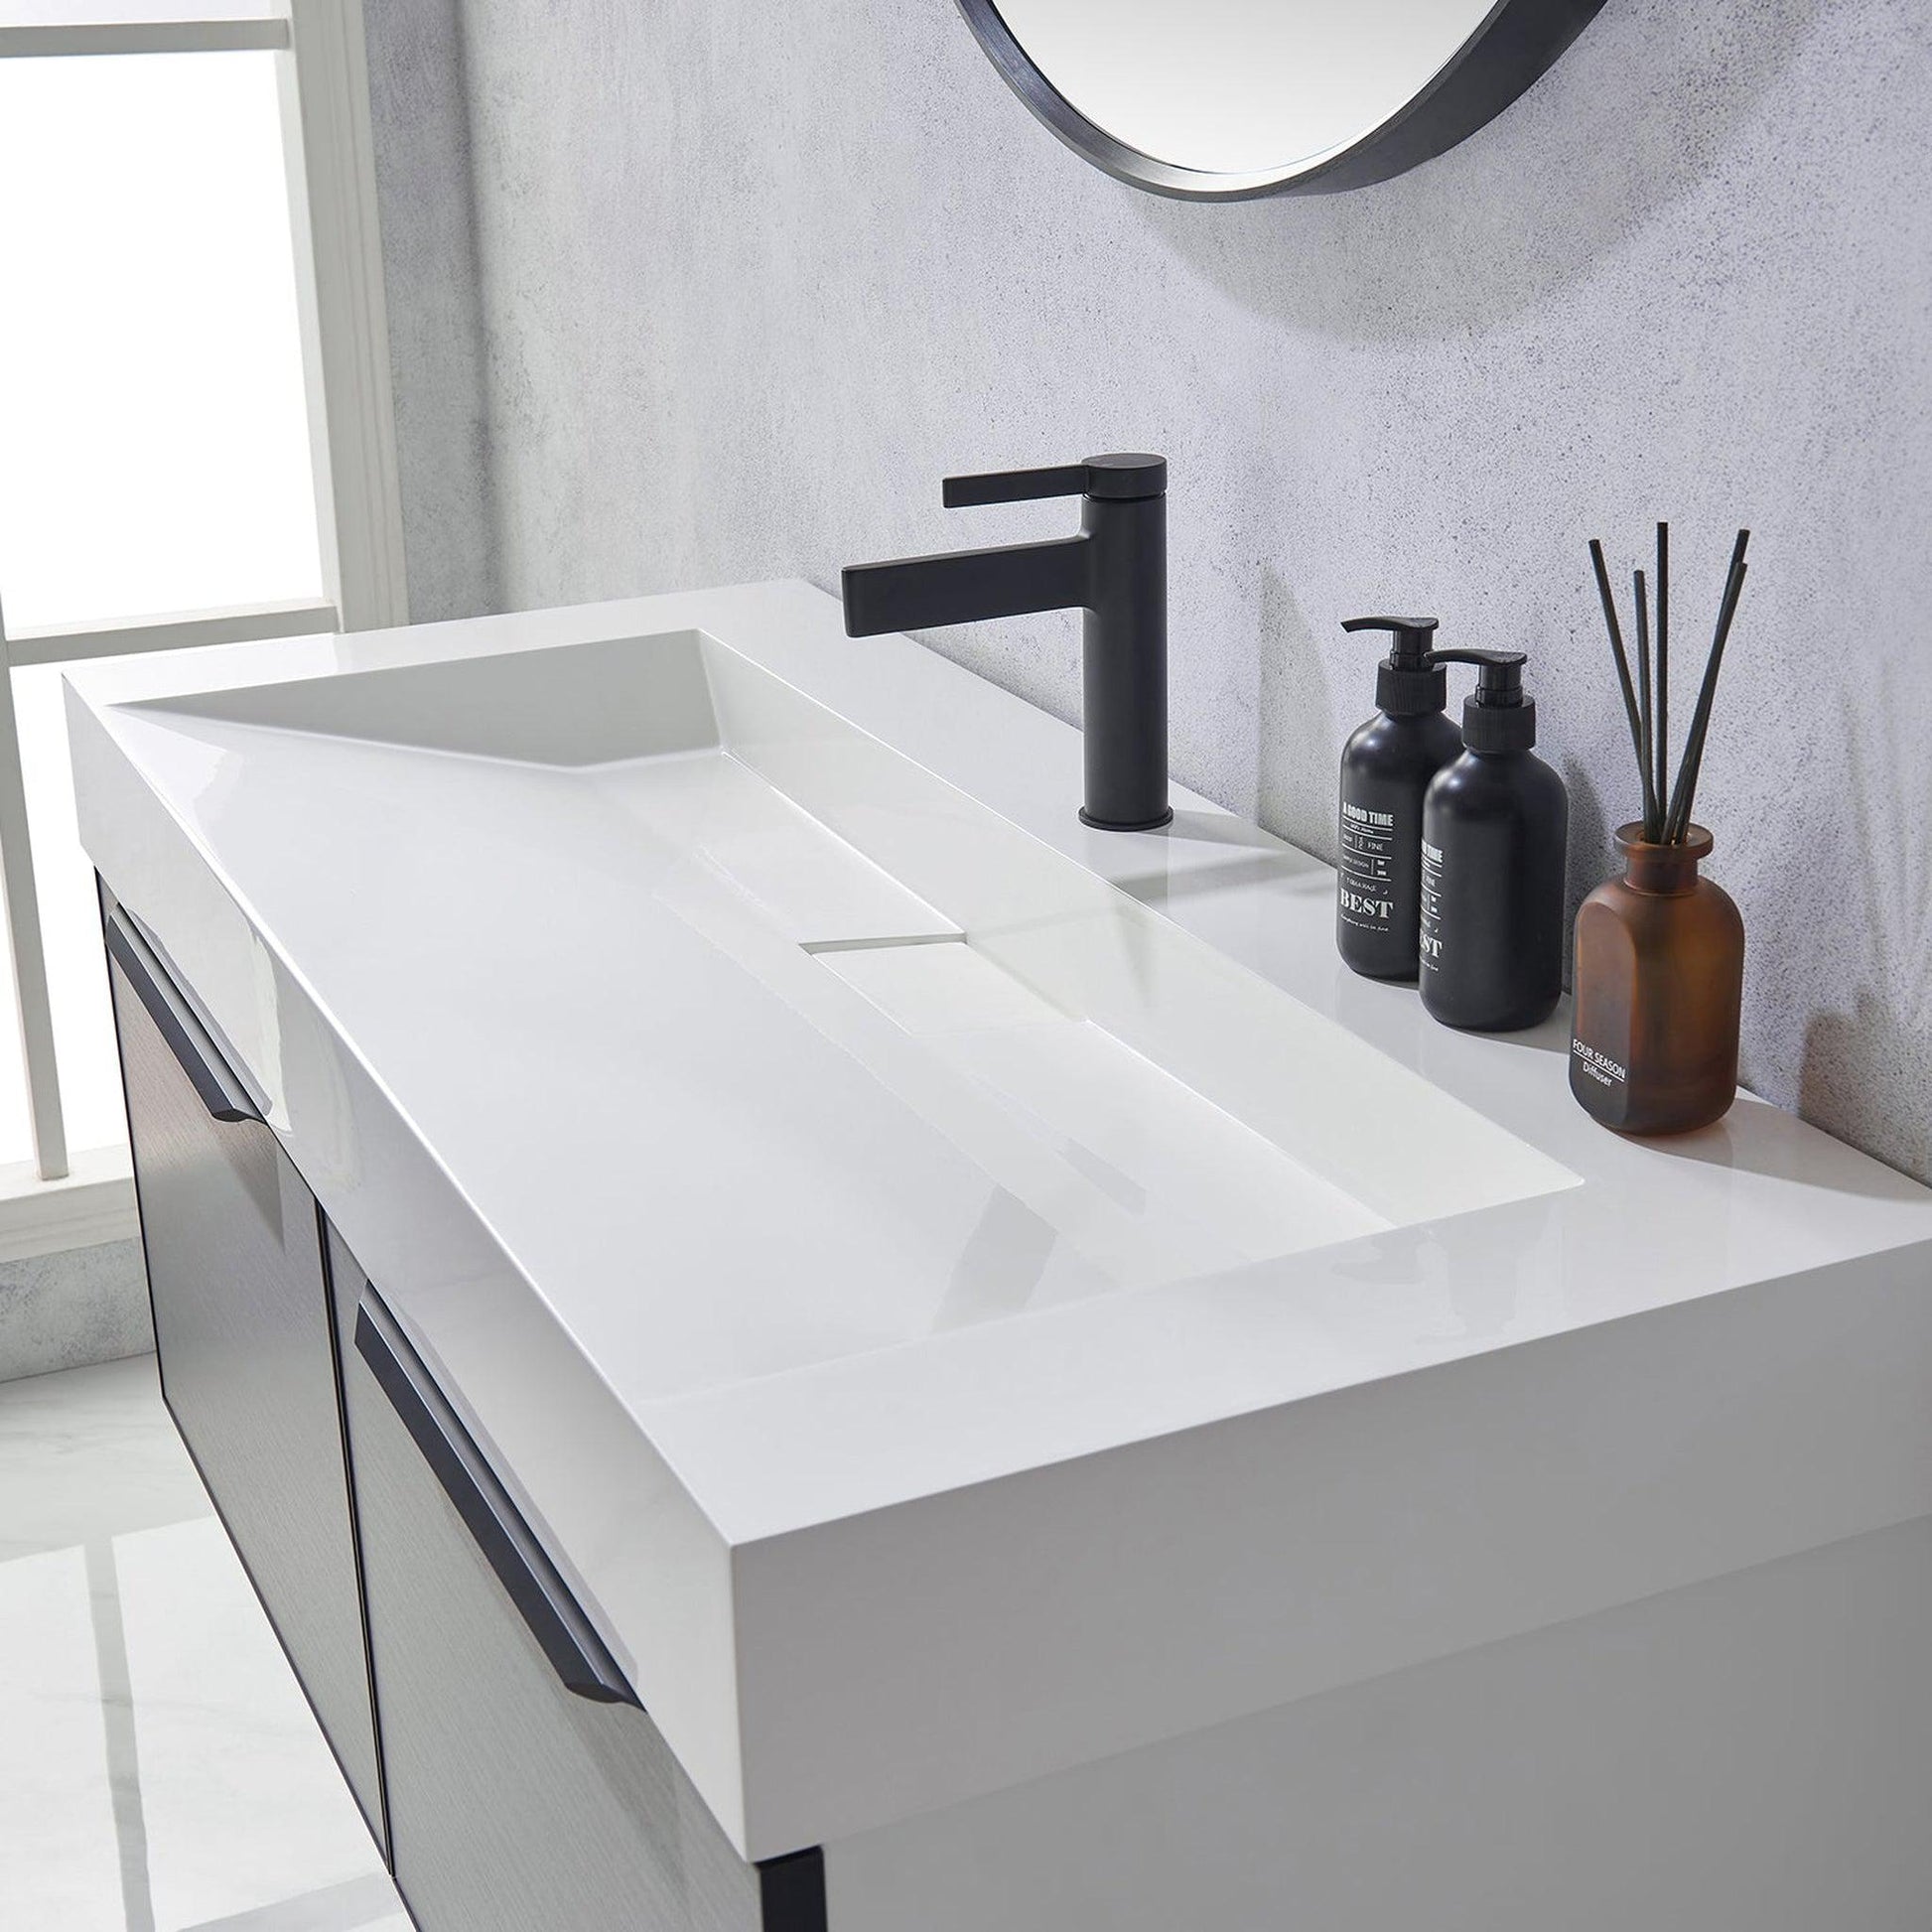 Vinnova Vegadeo 48" Single Sink Bath Vanity In Grey Finish With White One-Piece Composite Stone Sink Top And Mirror